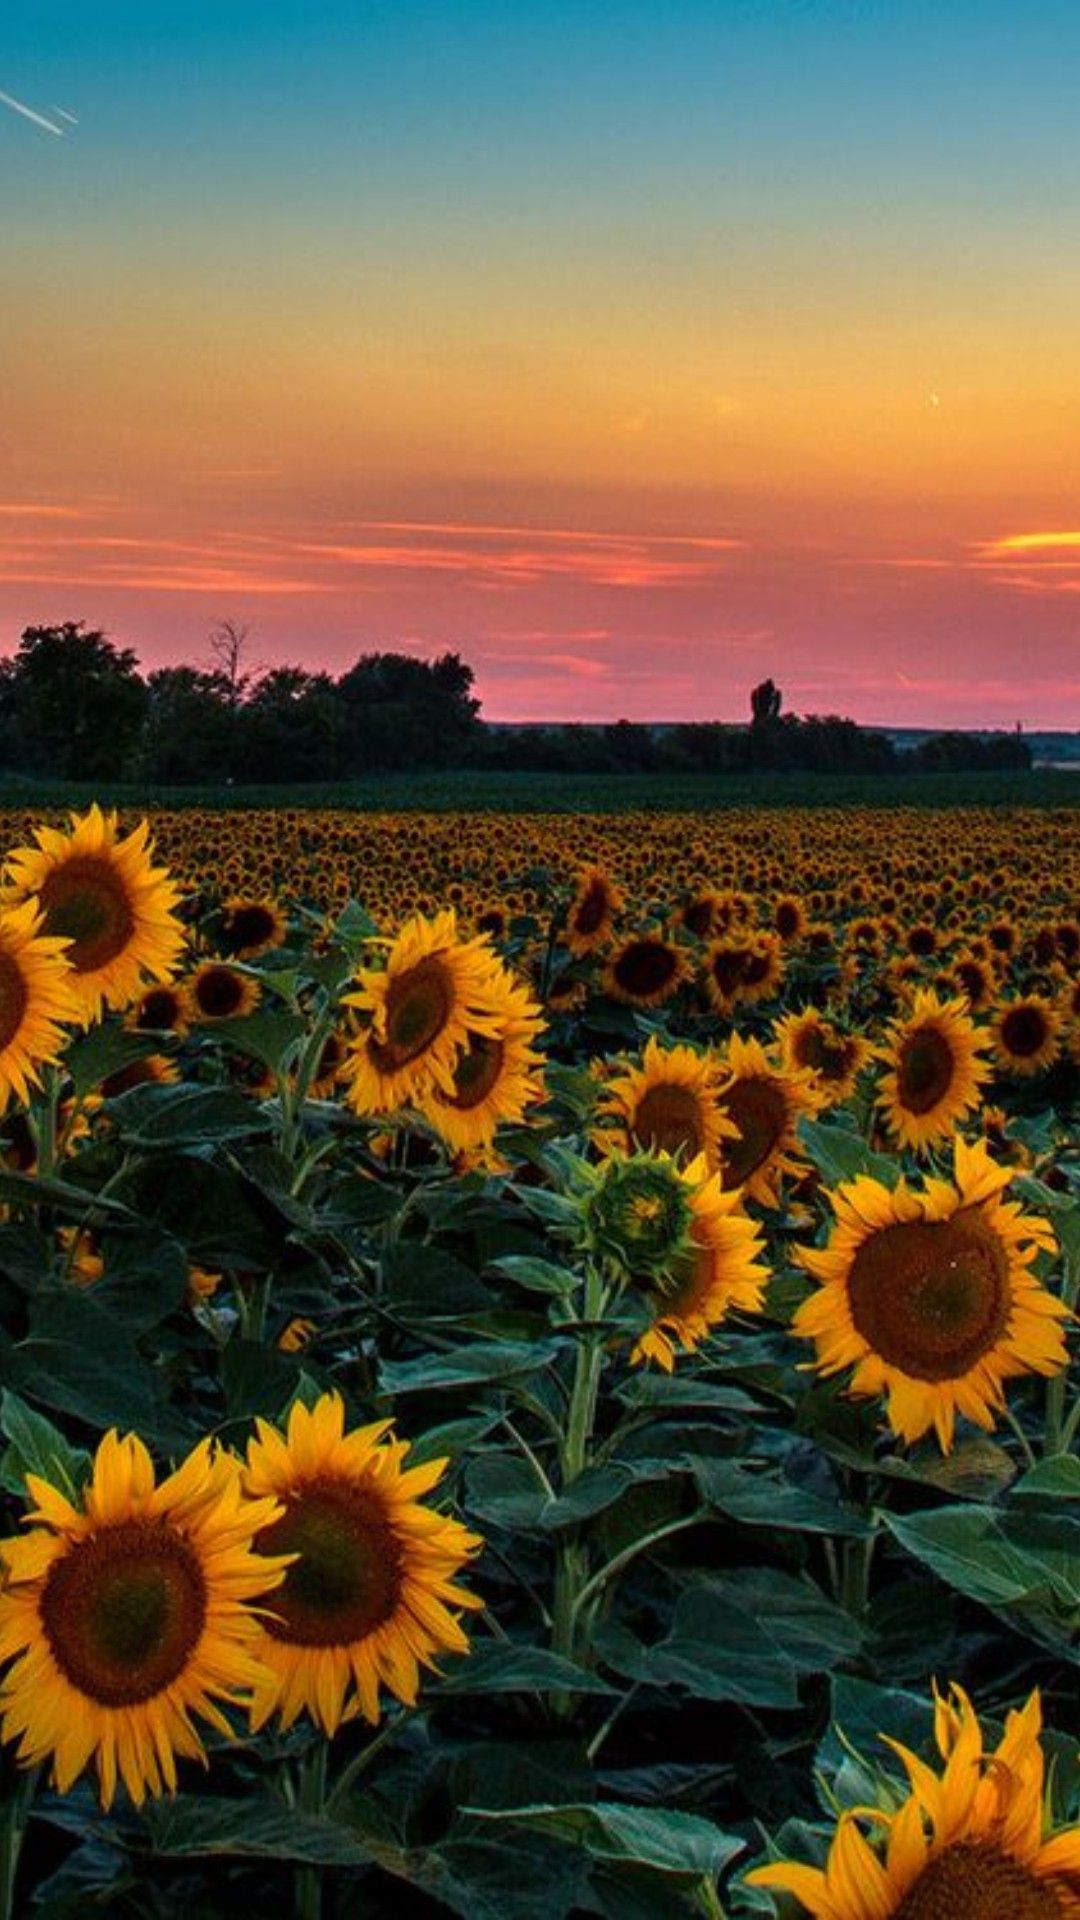 A field of sunflowers with a sunset in the background - Farm